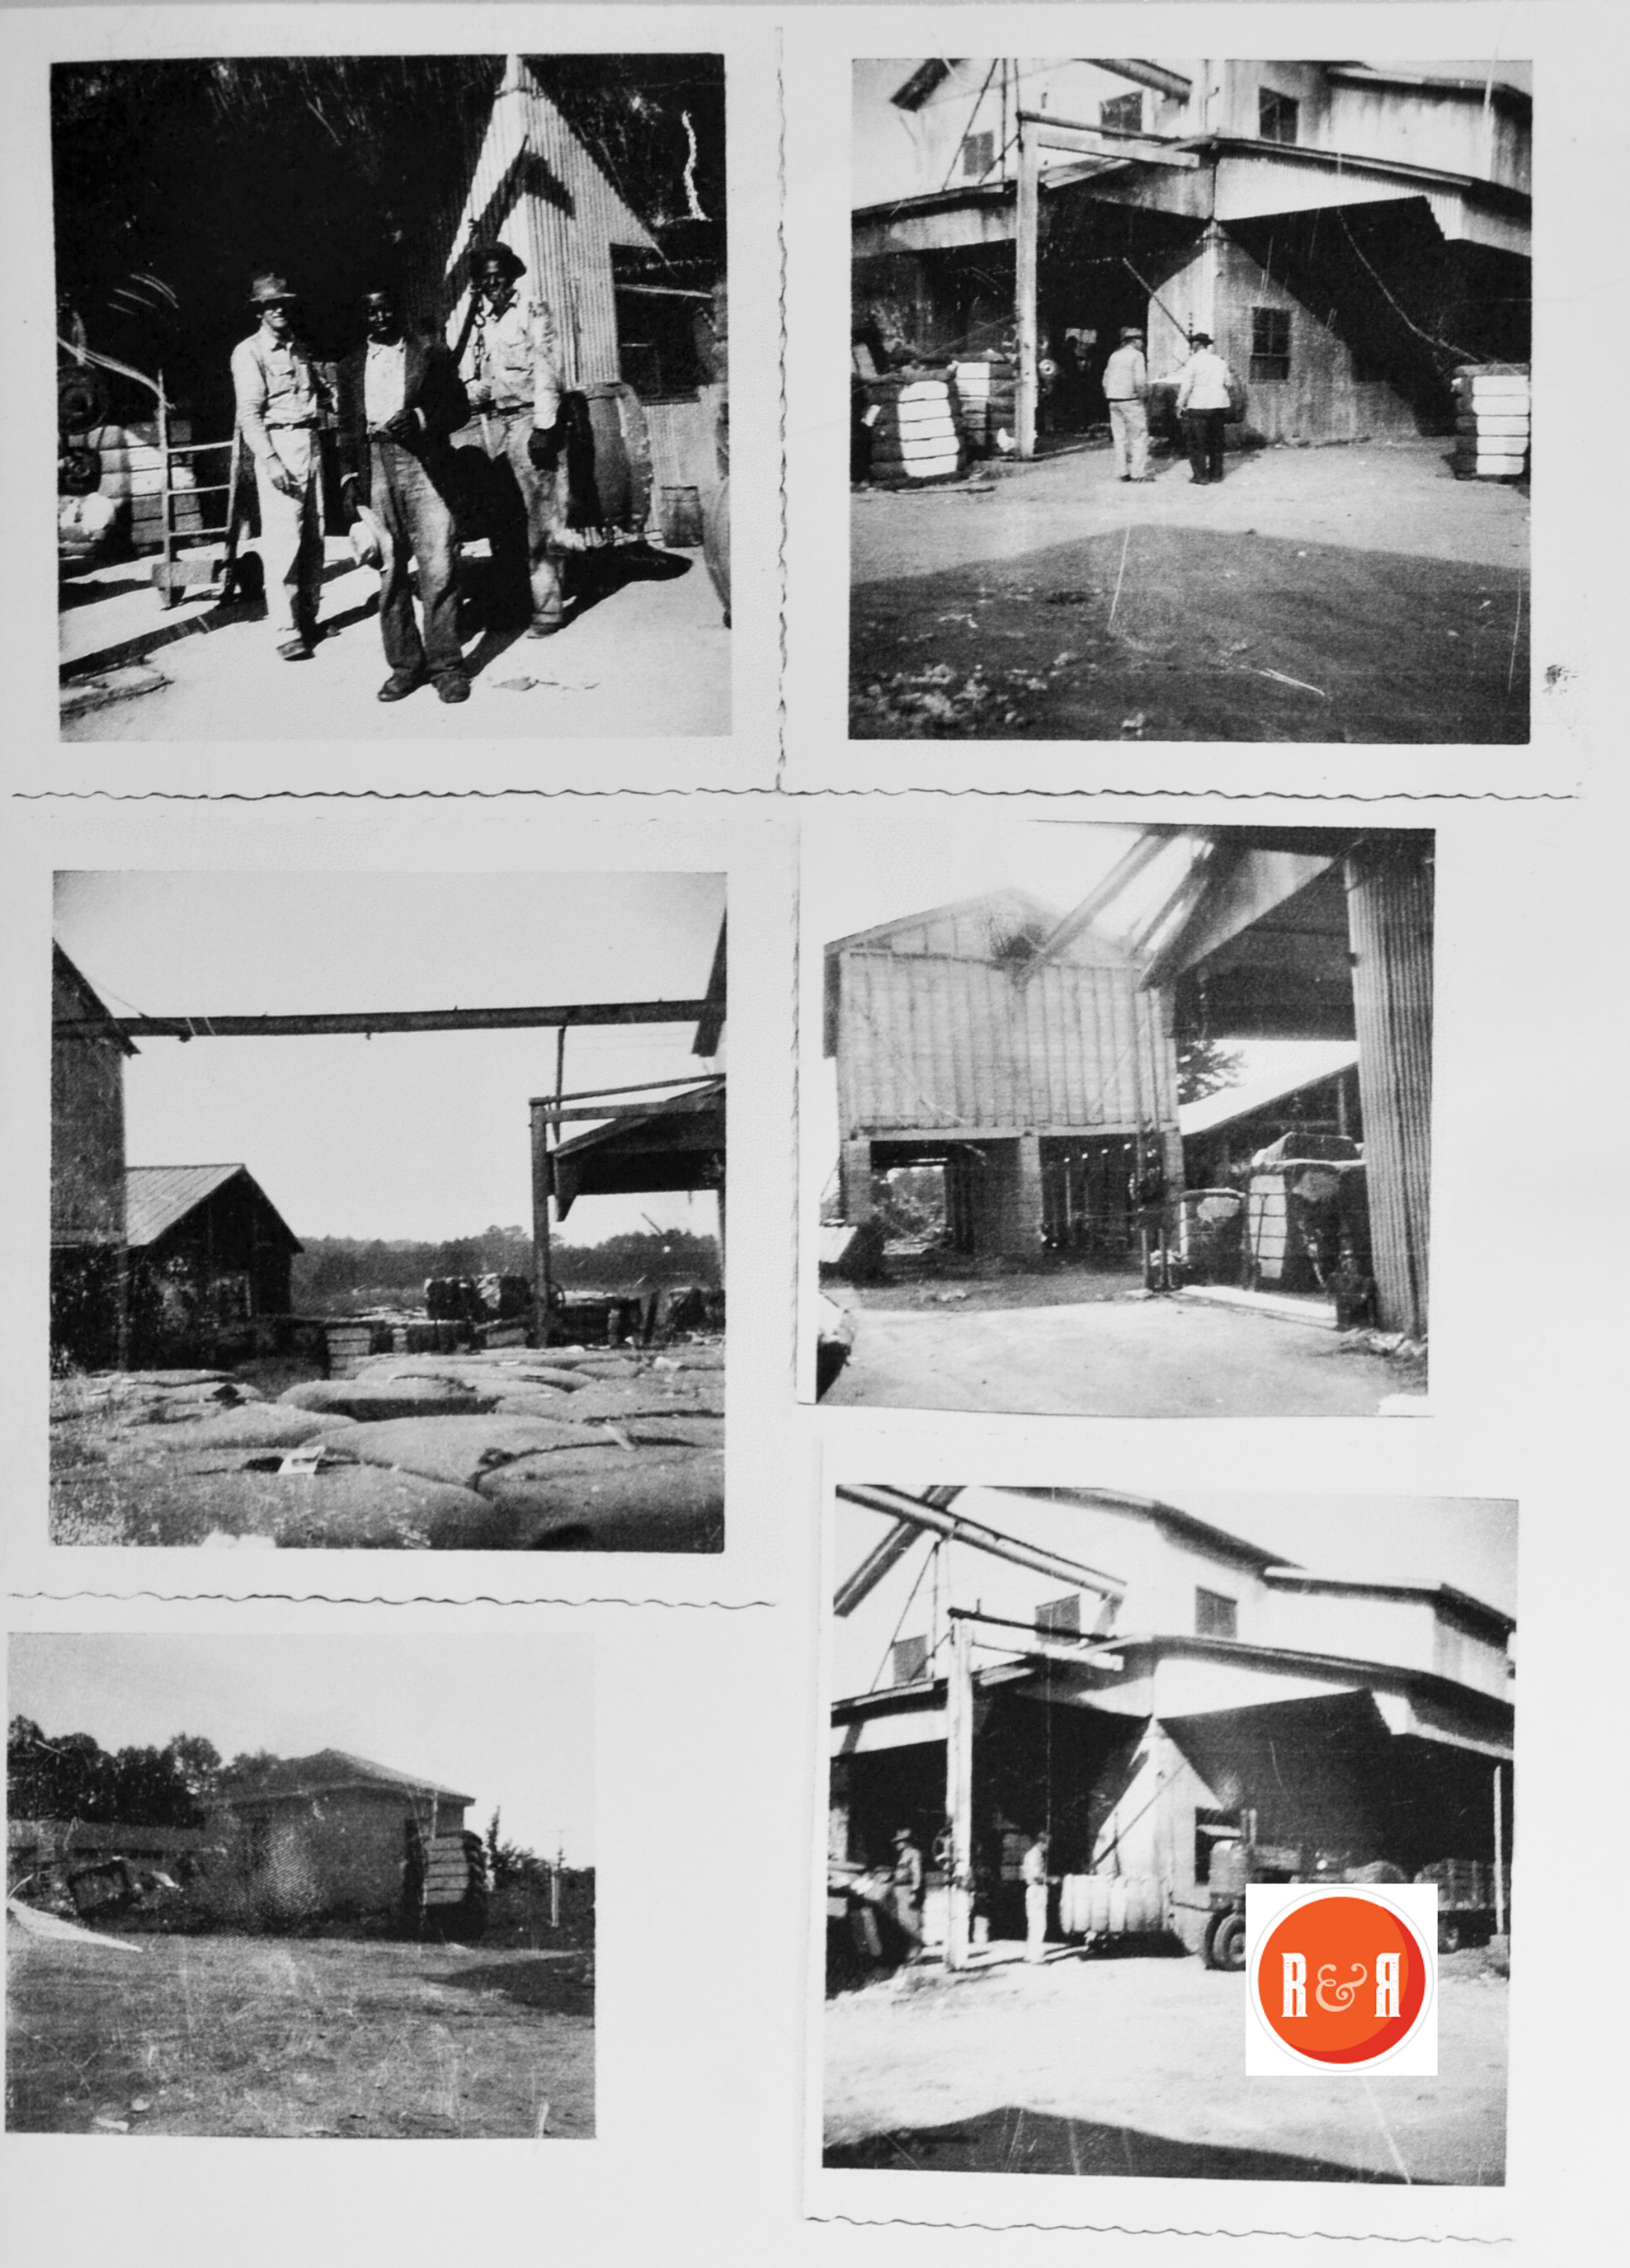 IMAGES RELATED TO THE PETTUS STORE #2